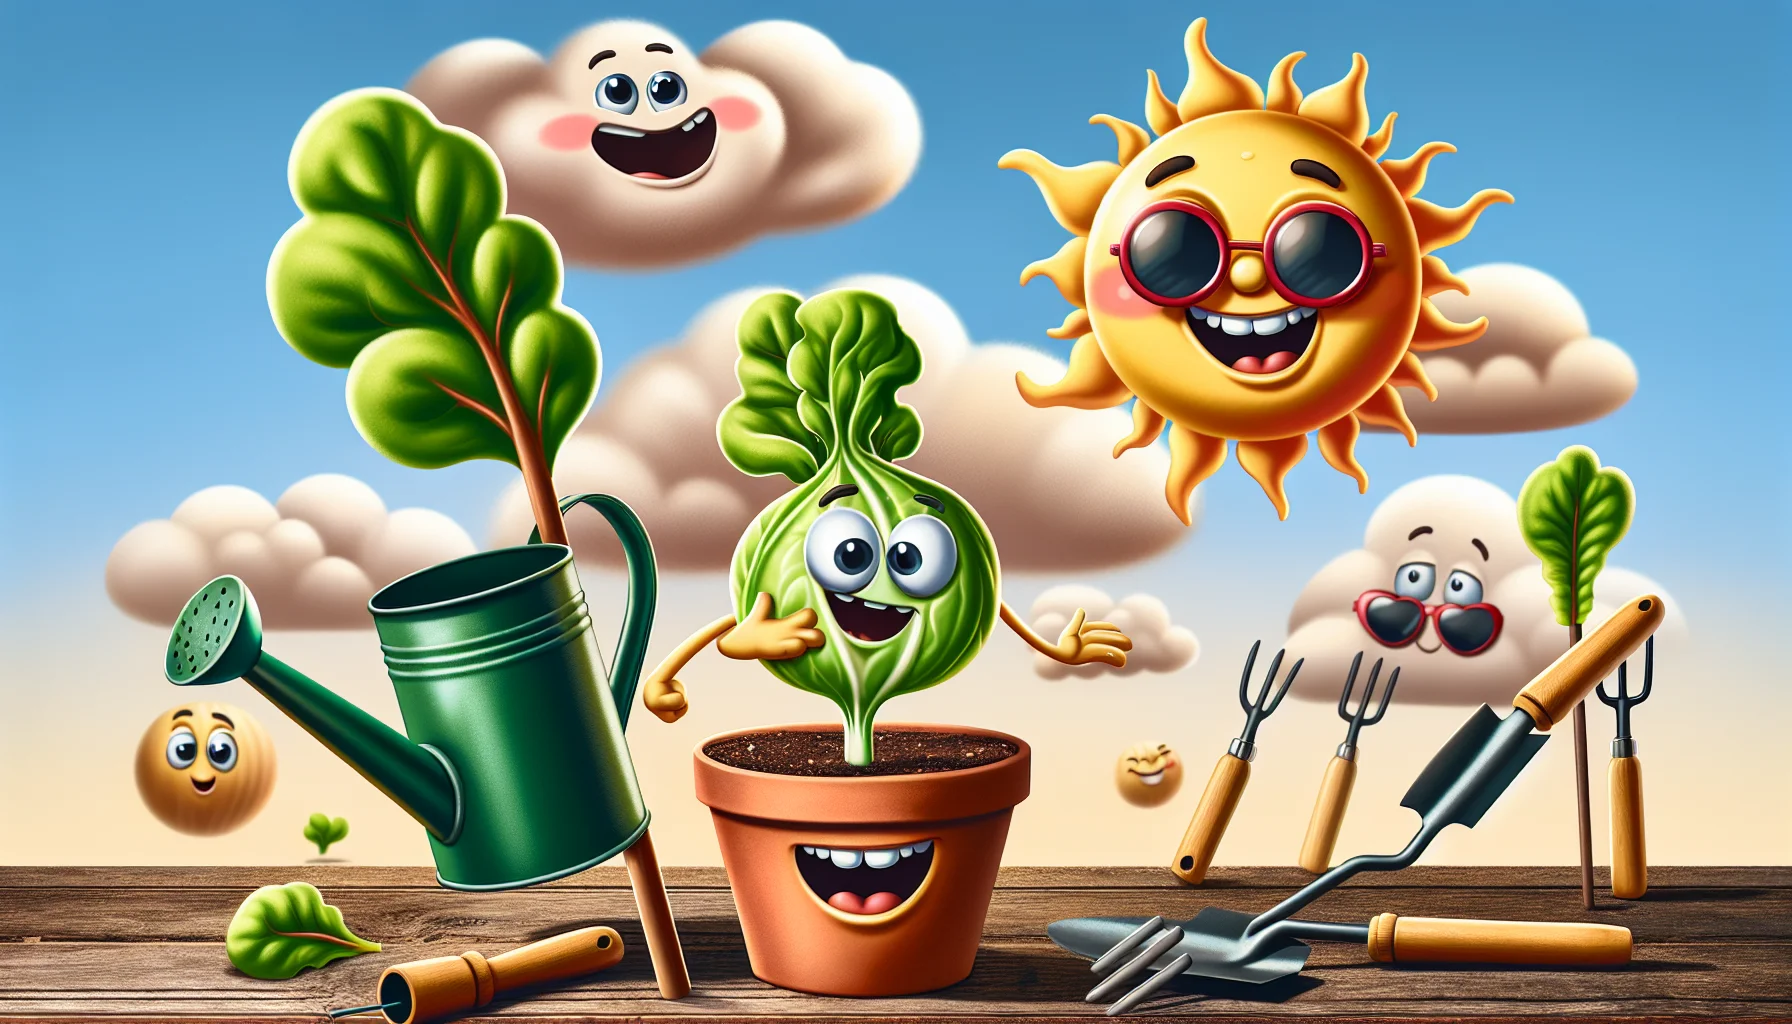 Imagine a humorous scene encouraging gardening, specifically growing lettuce from seed. Picture a small verdant seed sprouting a couple of lettuce leaves in a terracotta pot. Next to it, a cartoonish style watering can with a big goofy smile, eagerly awaiting to water the sprout. There should be background elements like a vibrant sun wearing sunglasses, a couple of fluffy clouds giggling, and gardening tools like a trowel and a spade playfully having a conversation. Every element in the scene is personified, imbued with a joyful disposition to depict an enticing, funny scene of gardening and the pleasure of growing lettuce from seed.